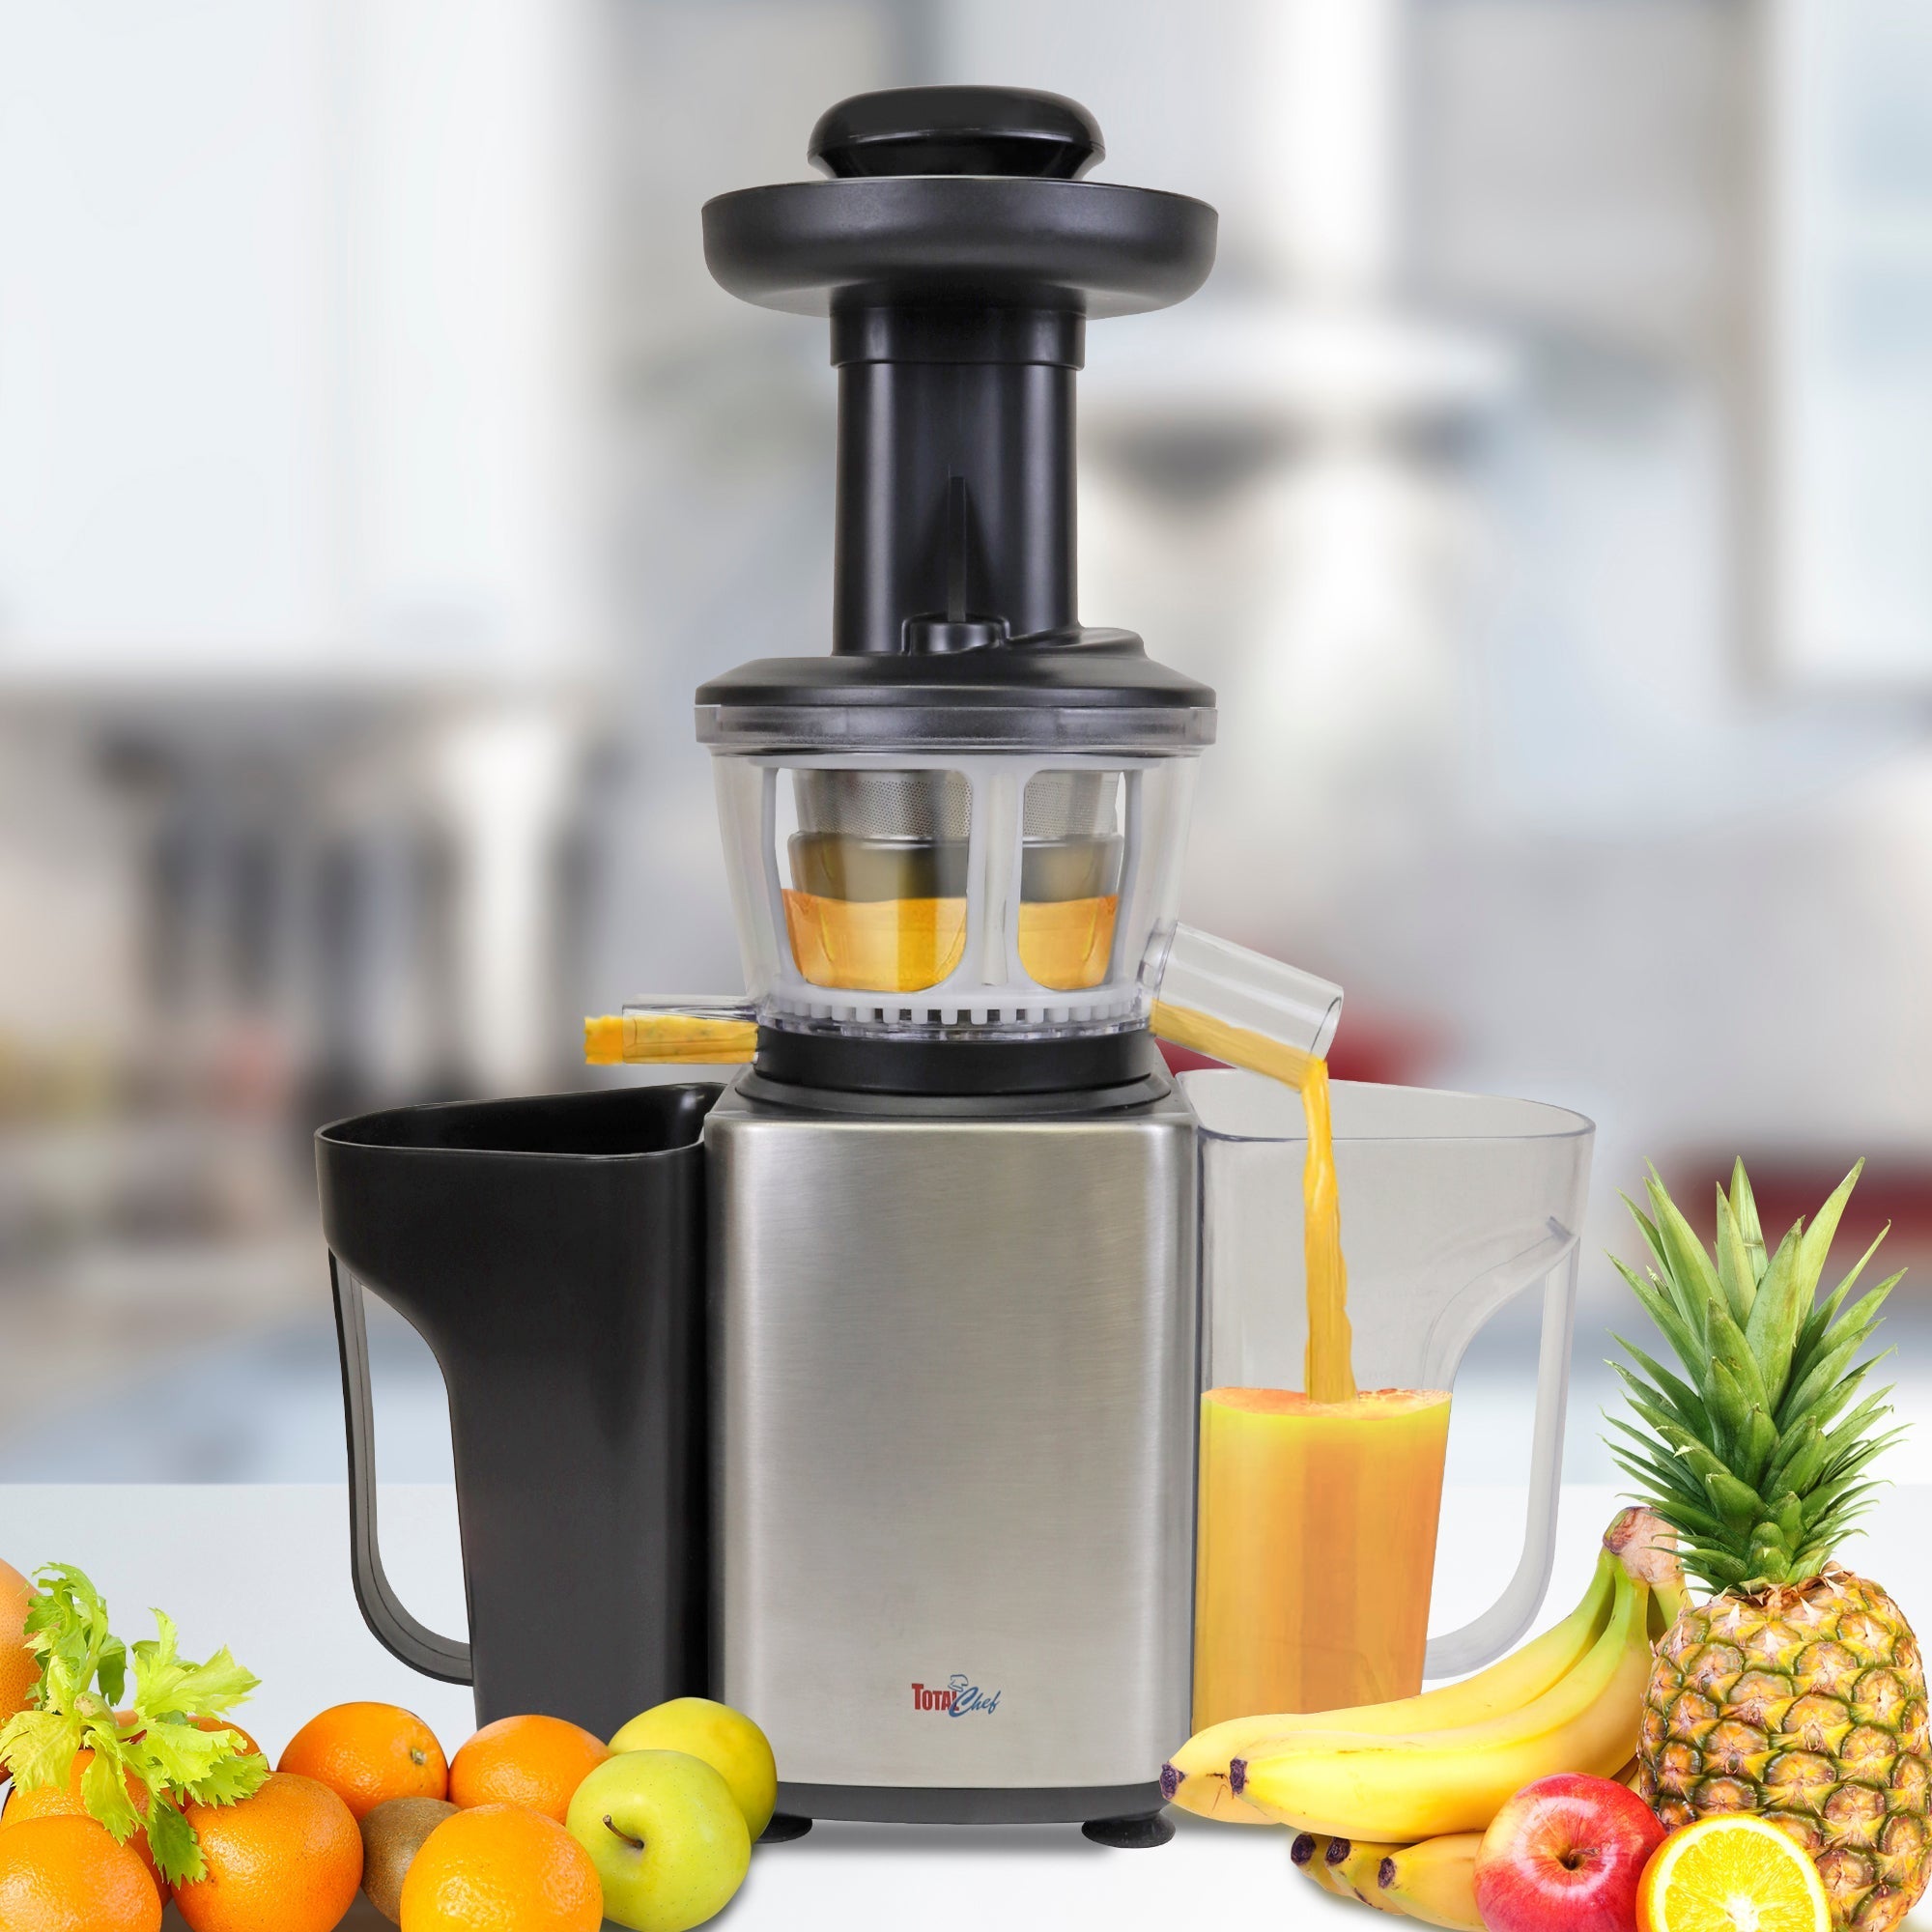 Lifestyle image of juicer in use with fruits and vegetables around it